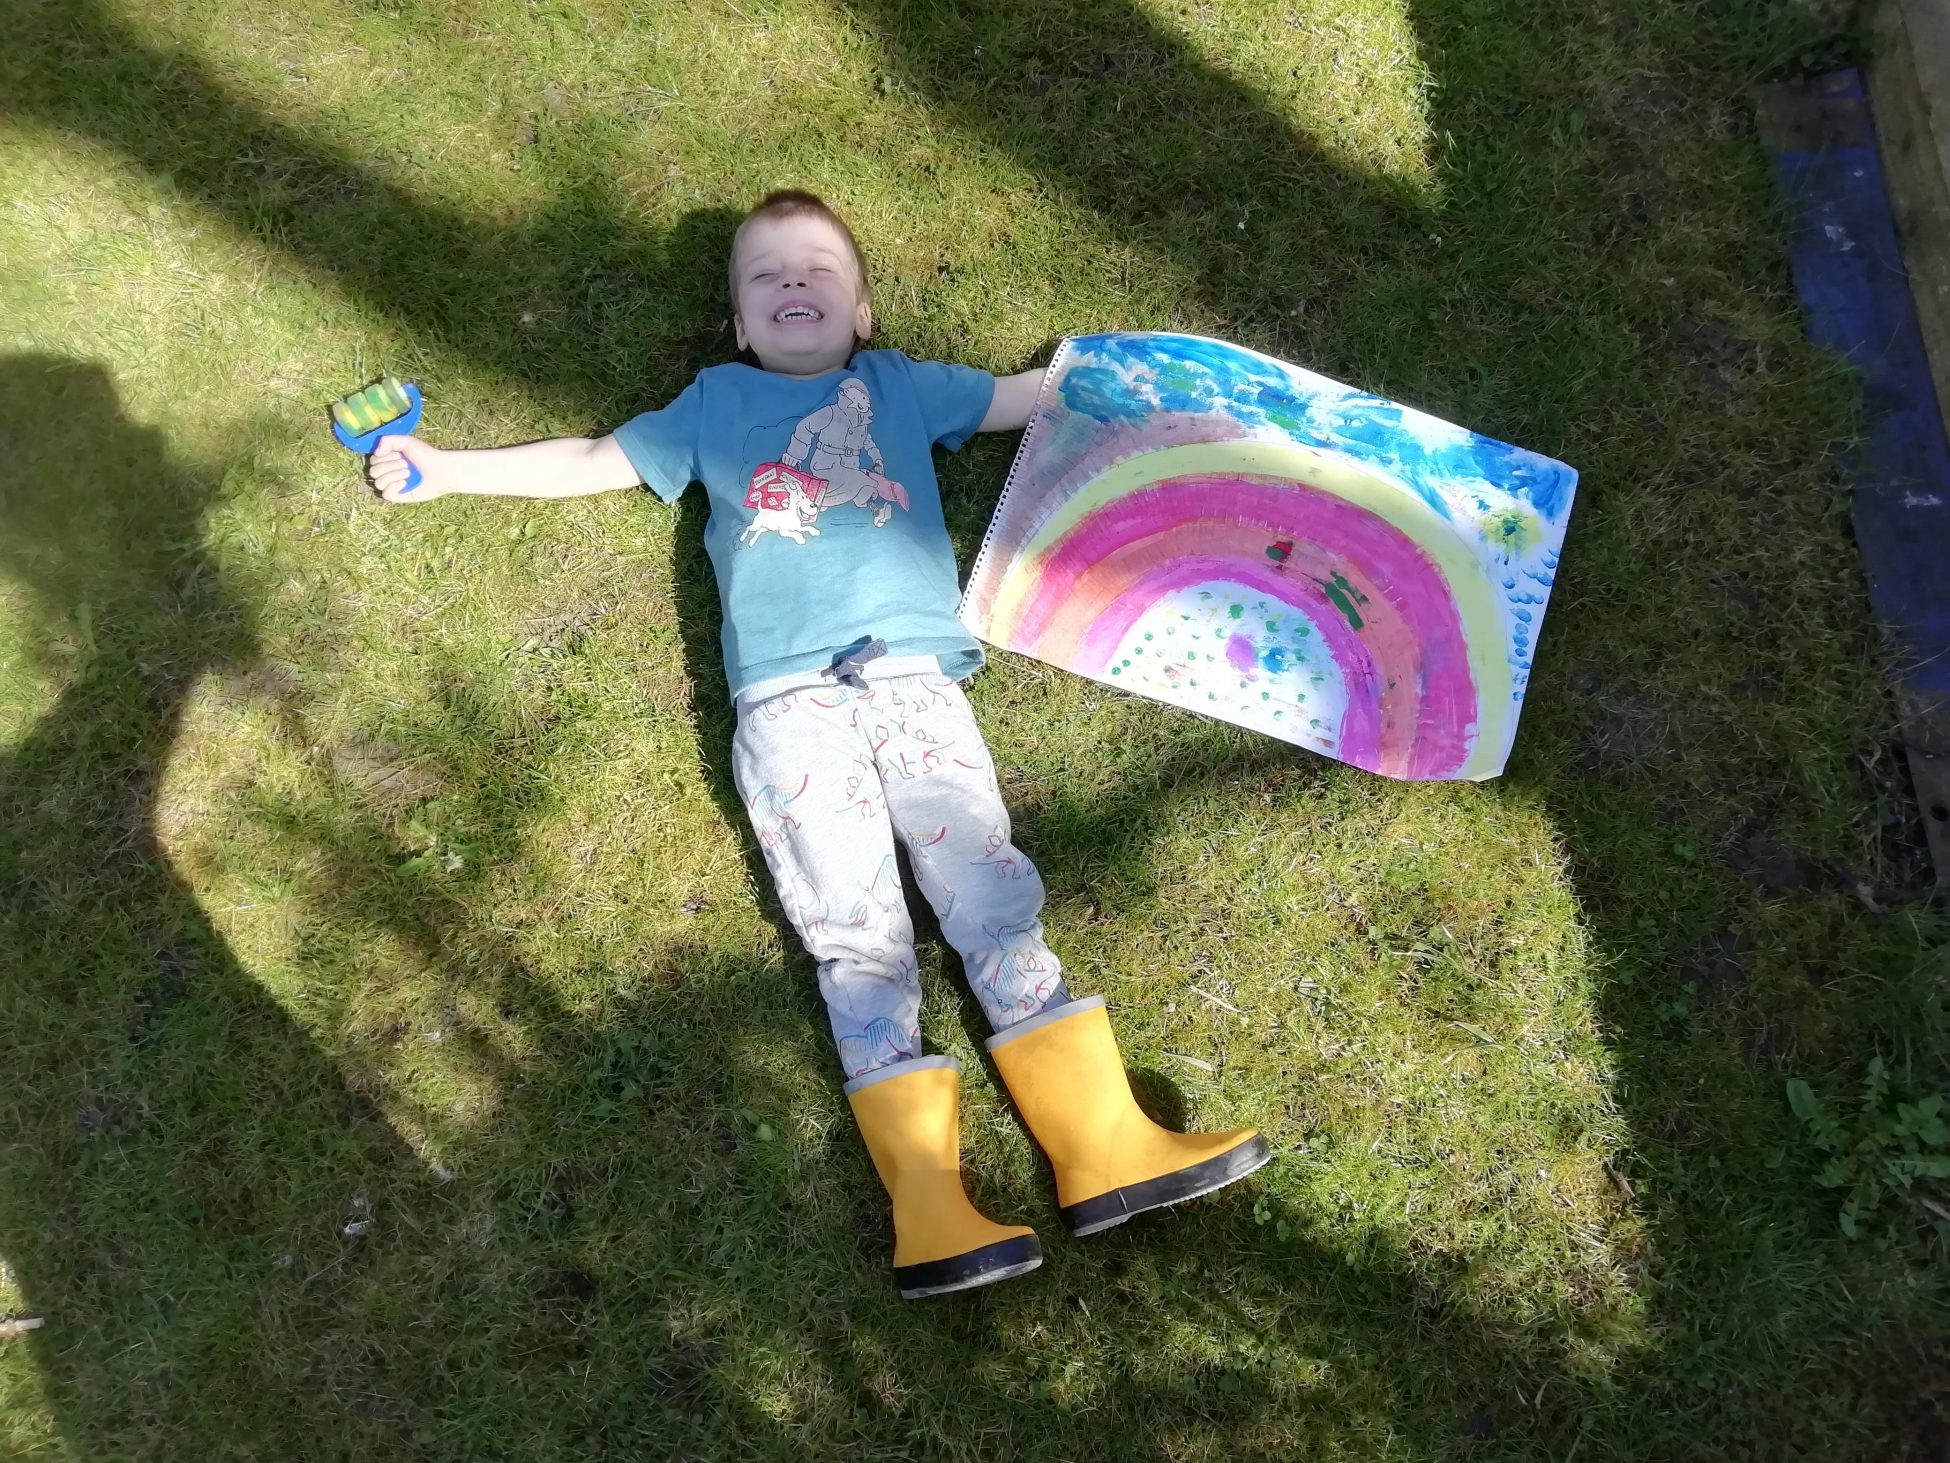 A young boy wearing blue jeans, a blue t-shirt and yellow wellies lying on the sun-lit grass next to his painting of a rainbow.